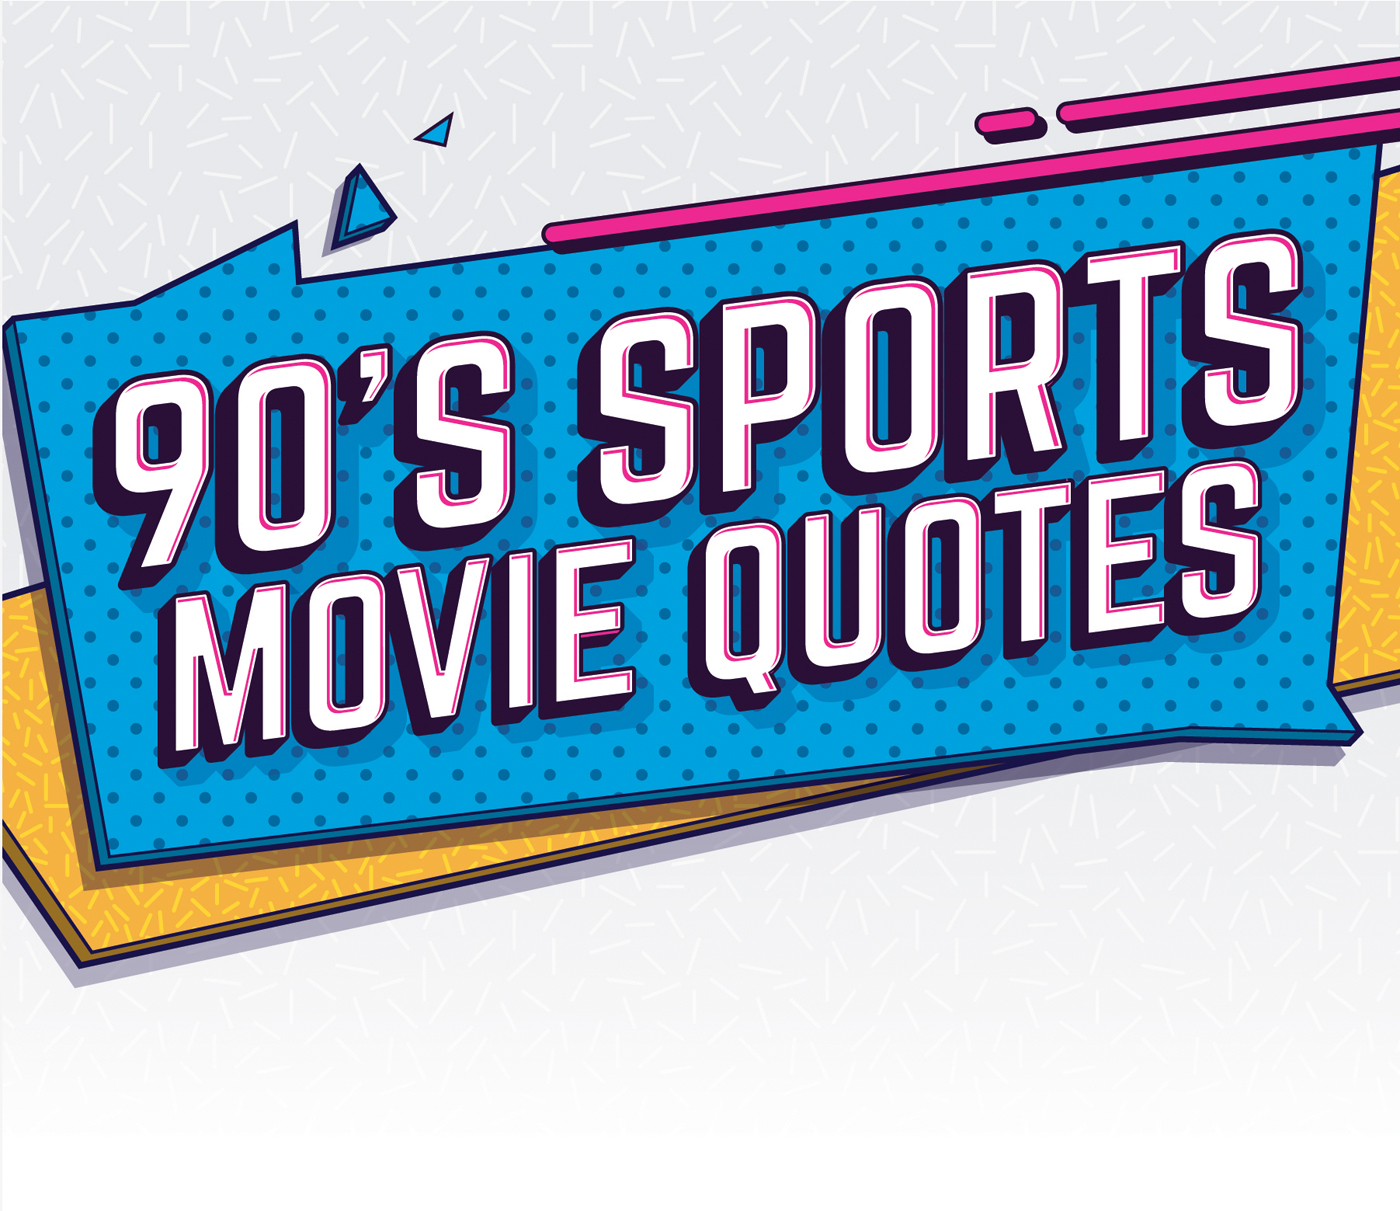 90's sports Movies Quotes posters The Mighty Ducks the sandlot  The Waterboy rookie color